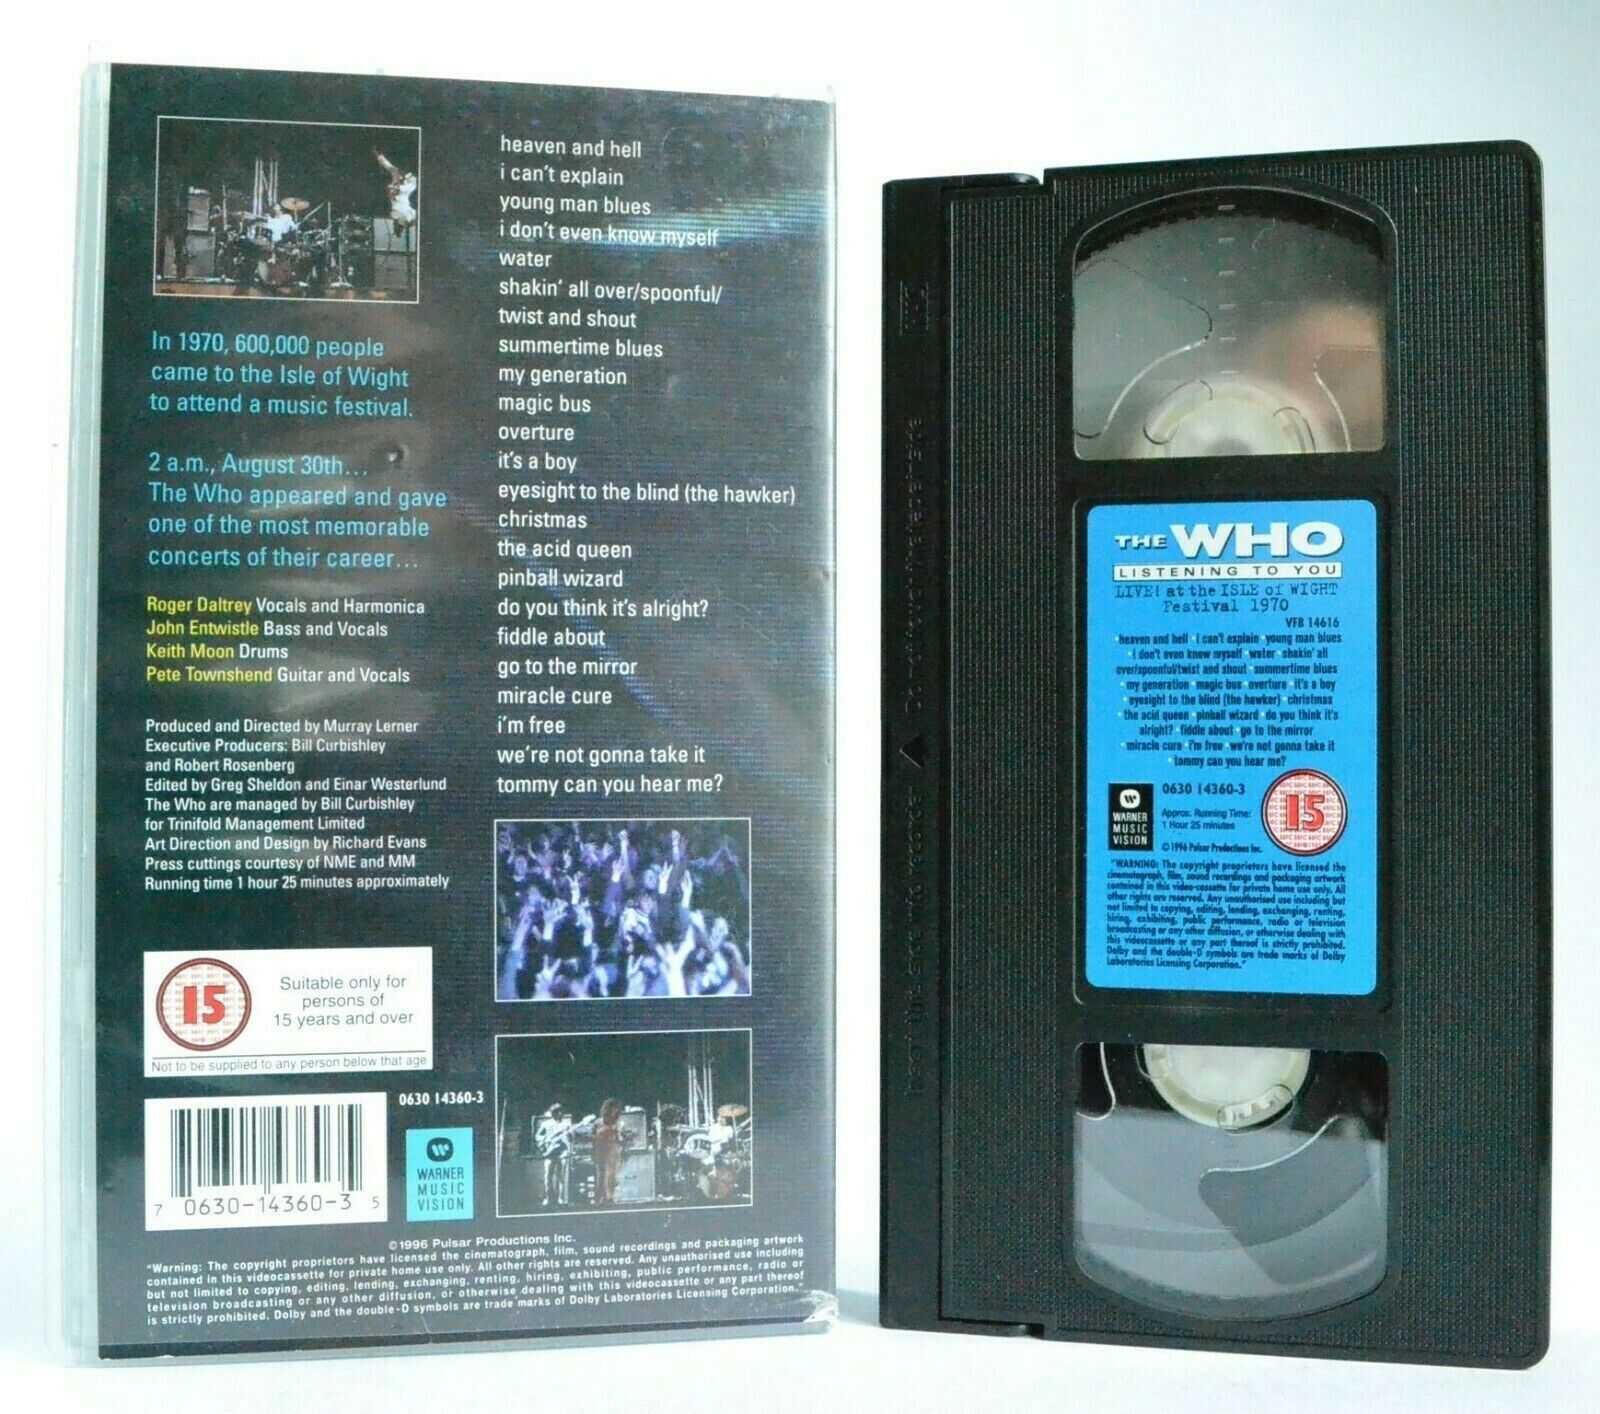 The Who: Listening To You - Live At Isle Of Wight (1970) Classic Rock Band - VHS-